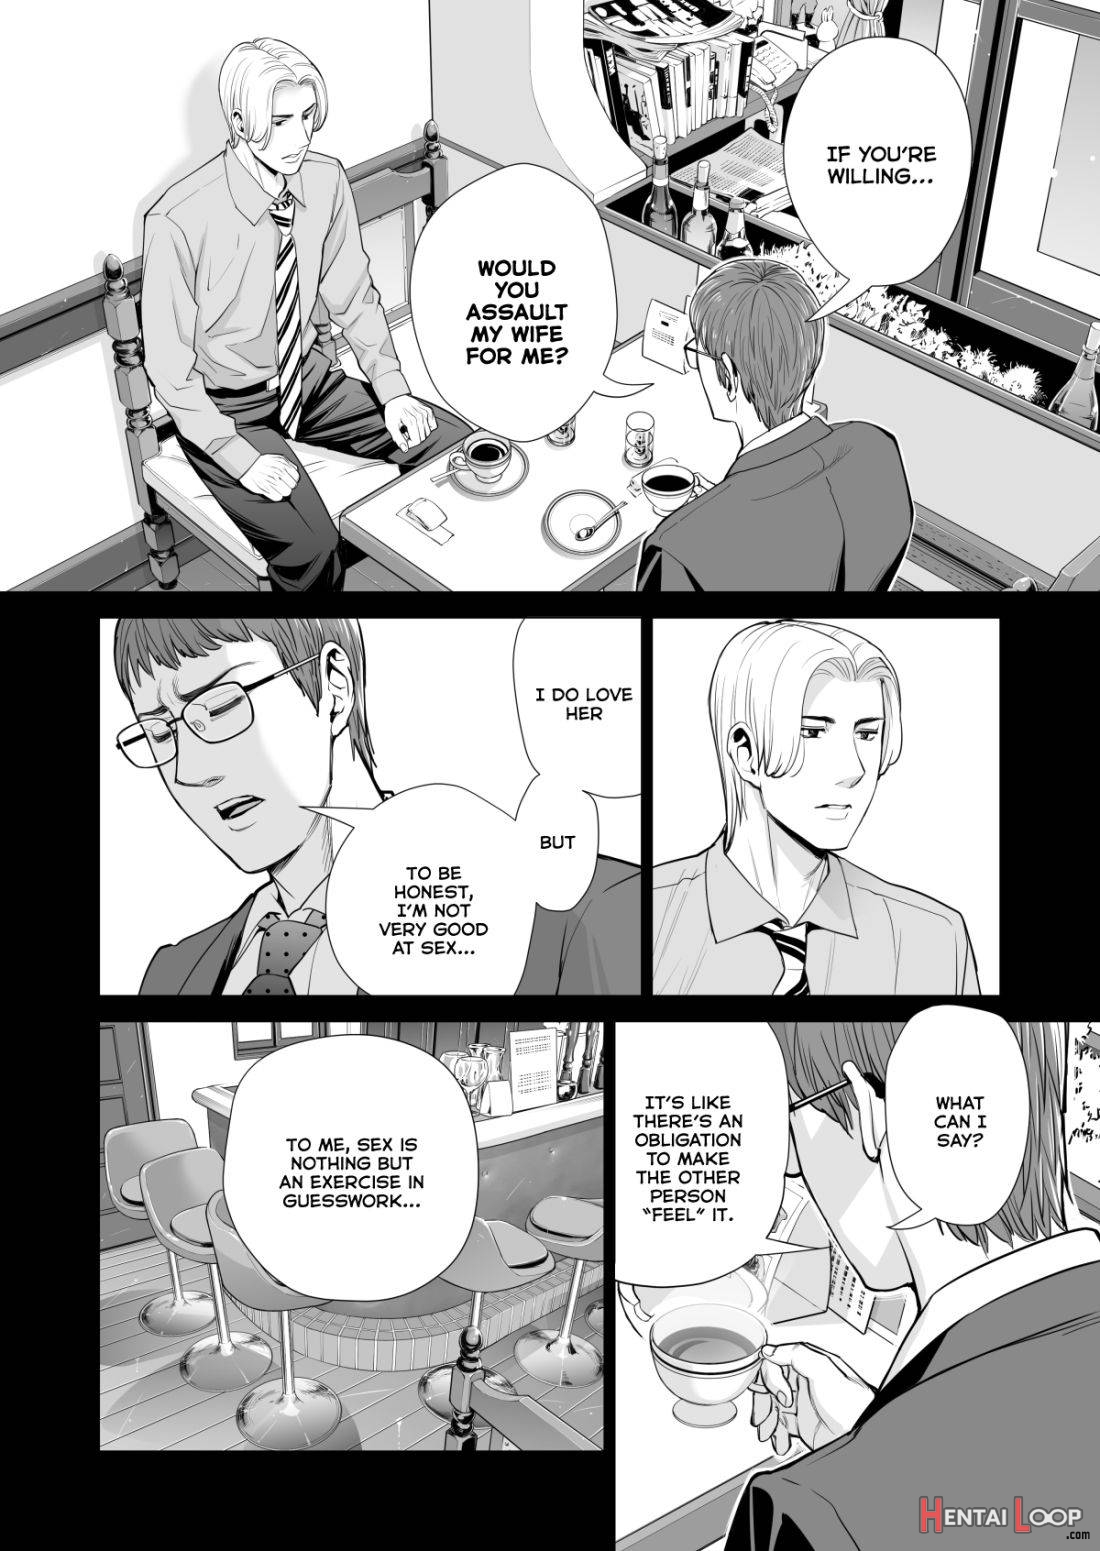 Tsukiyo no Midare Zake (Kouhen) Moonlit Intoxication ~ A Housewife Stolen by a Coworker Besides her Blackout Drunk Husband ~ Chapter 2 page 45